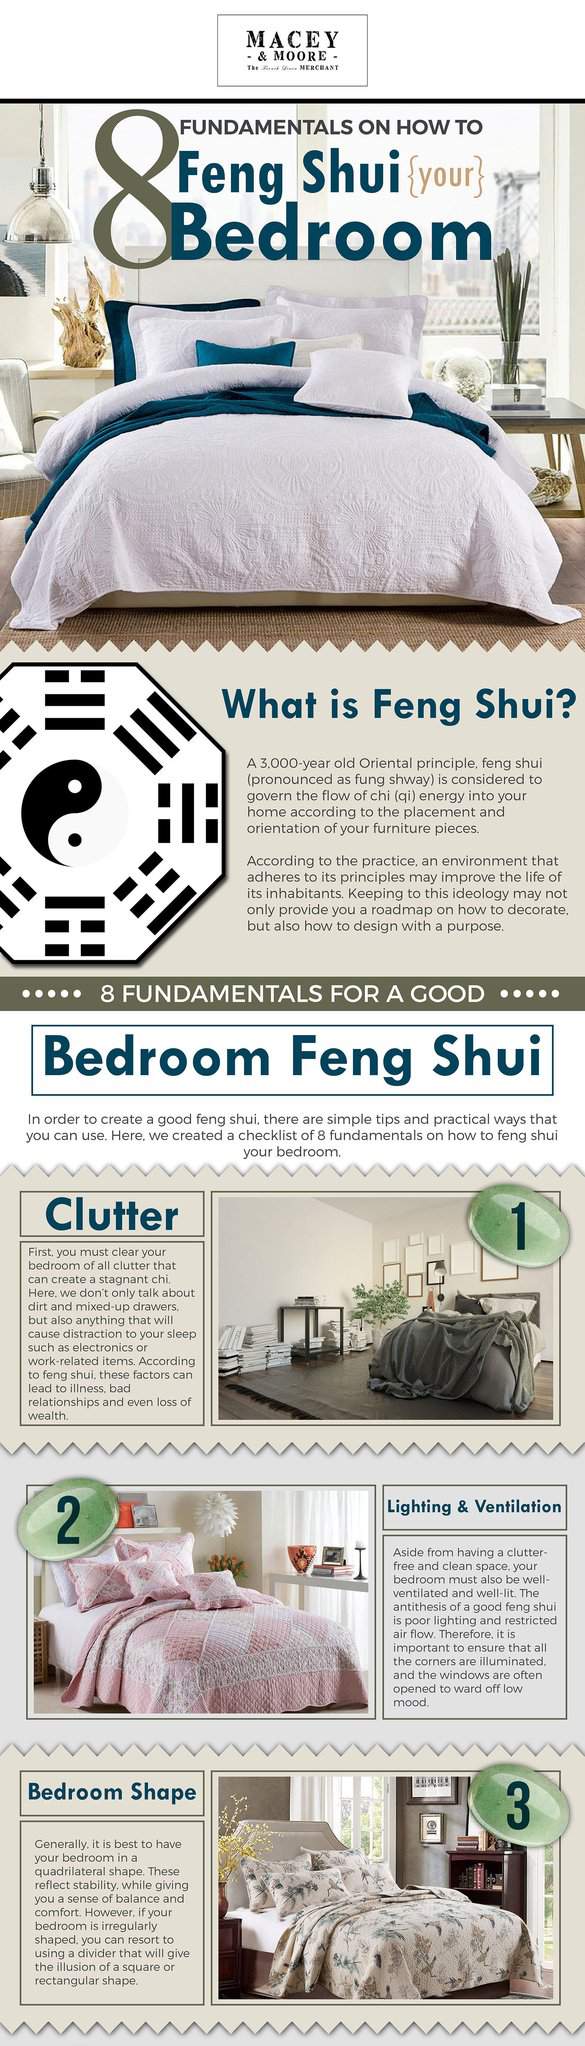 8 Fundamentals on How to Feng Shui your Bedroom